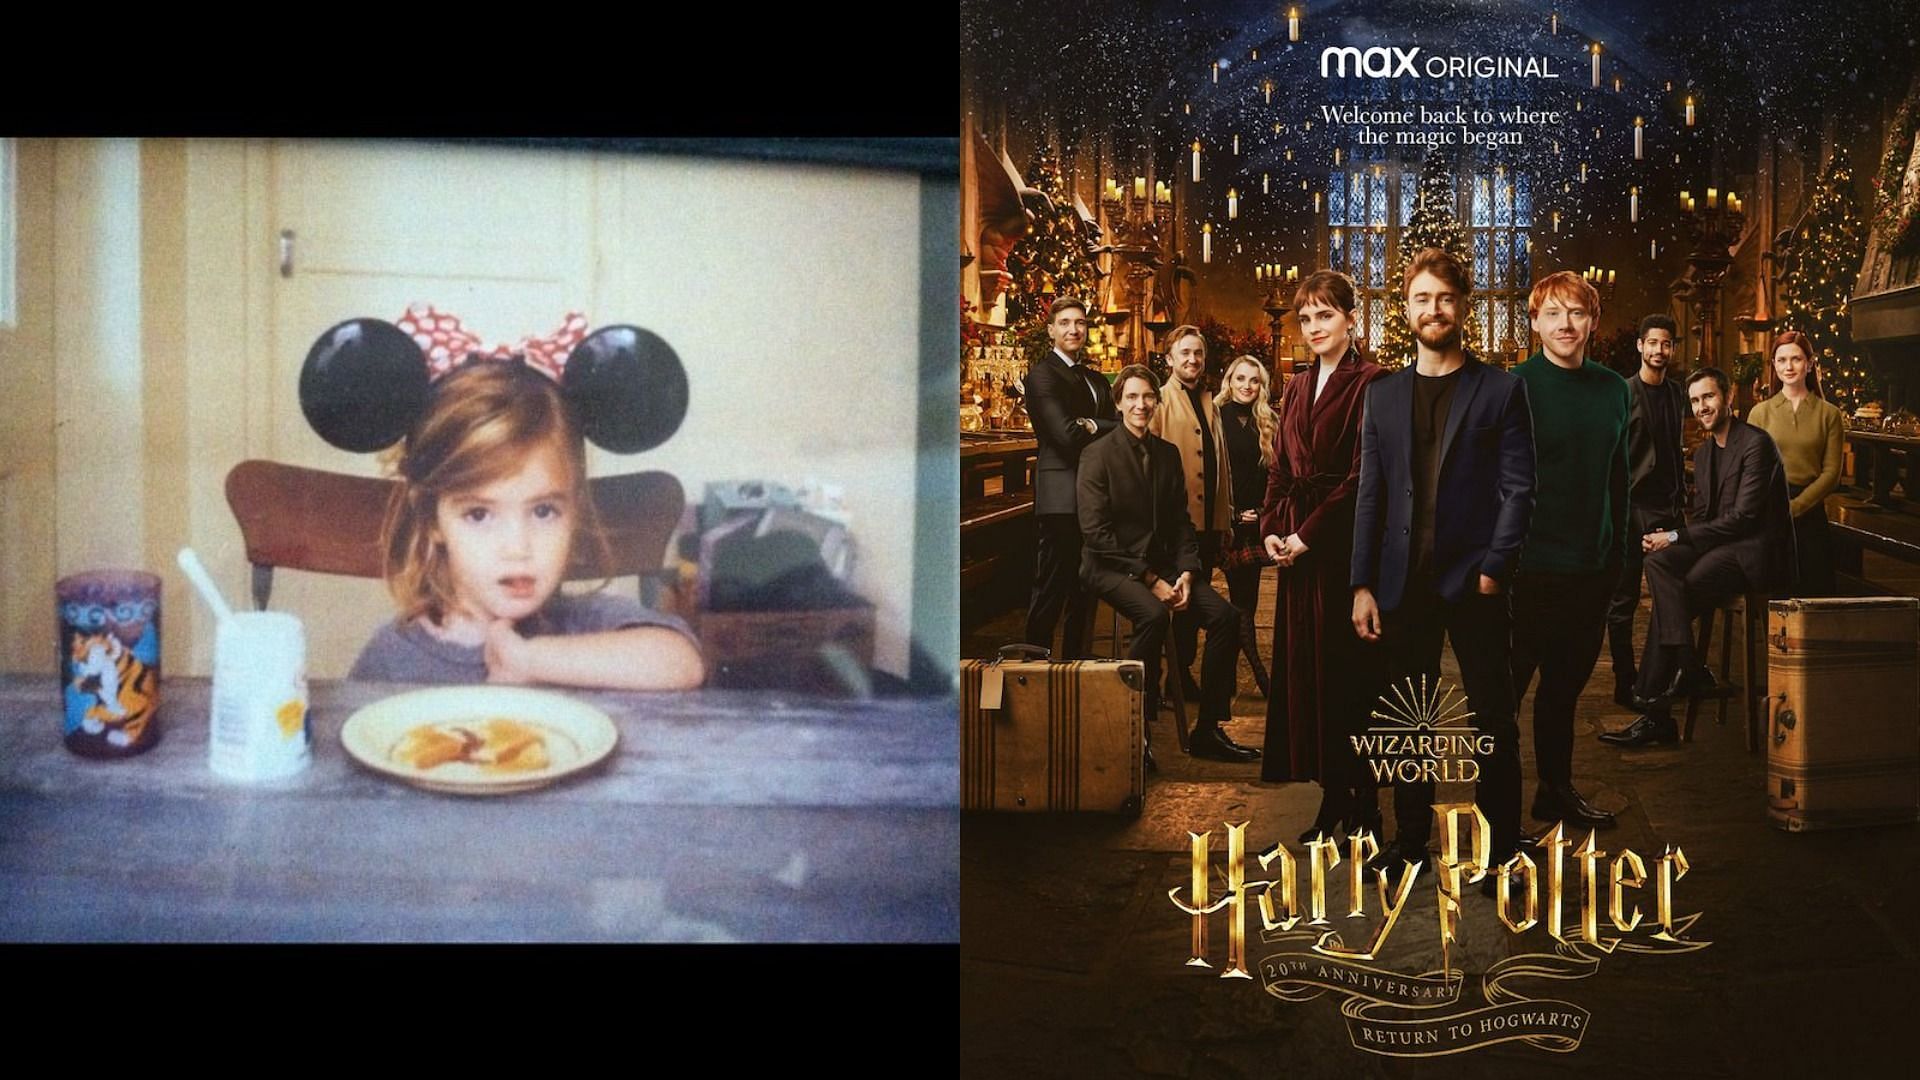 Potterheads had a meltdown over Emma Roberts childhood photo in Harry Potter reunion (Image via Instagram/emmaroberts and HBO Max)